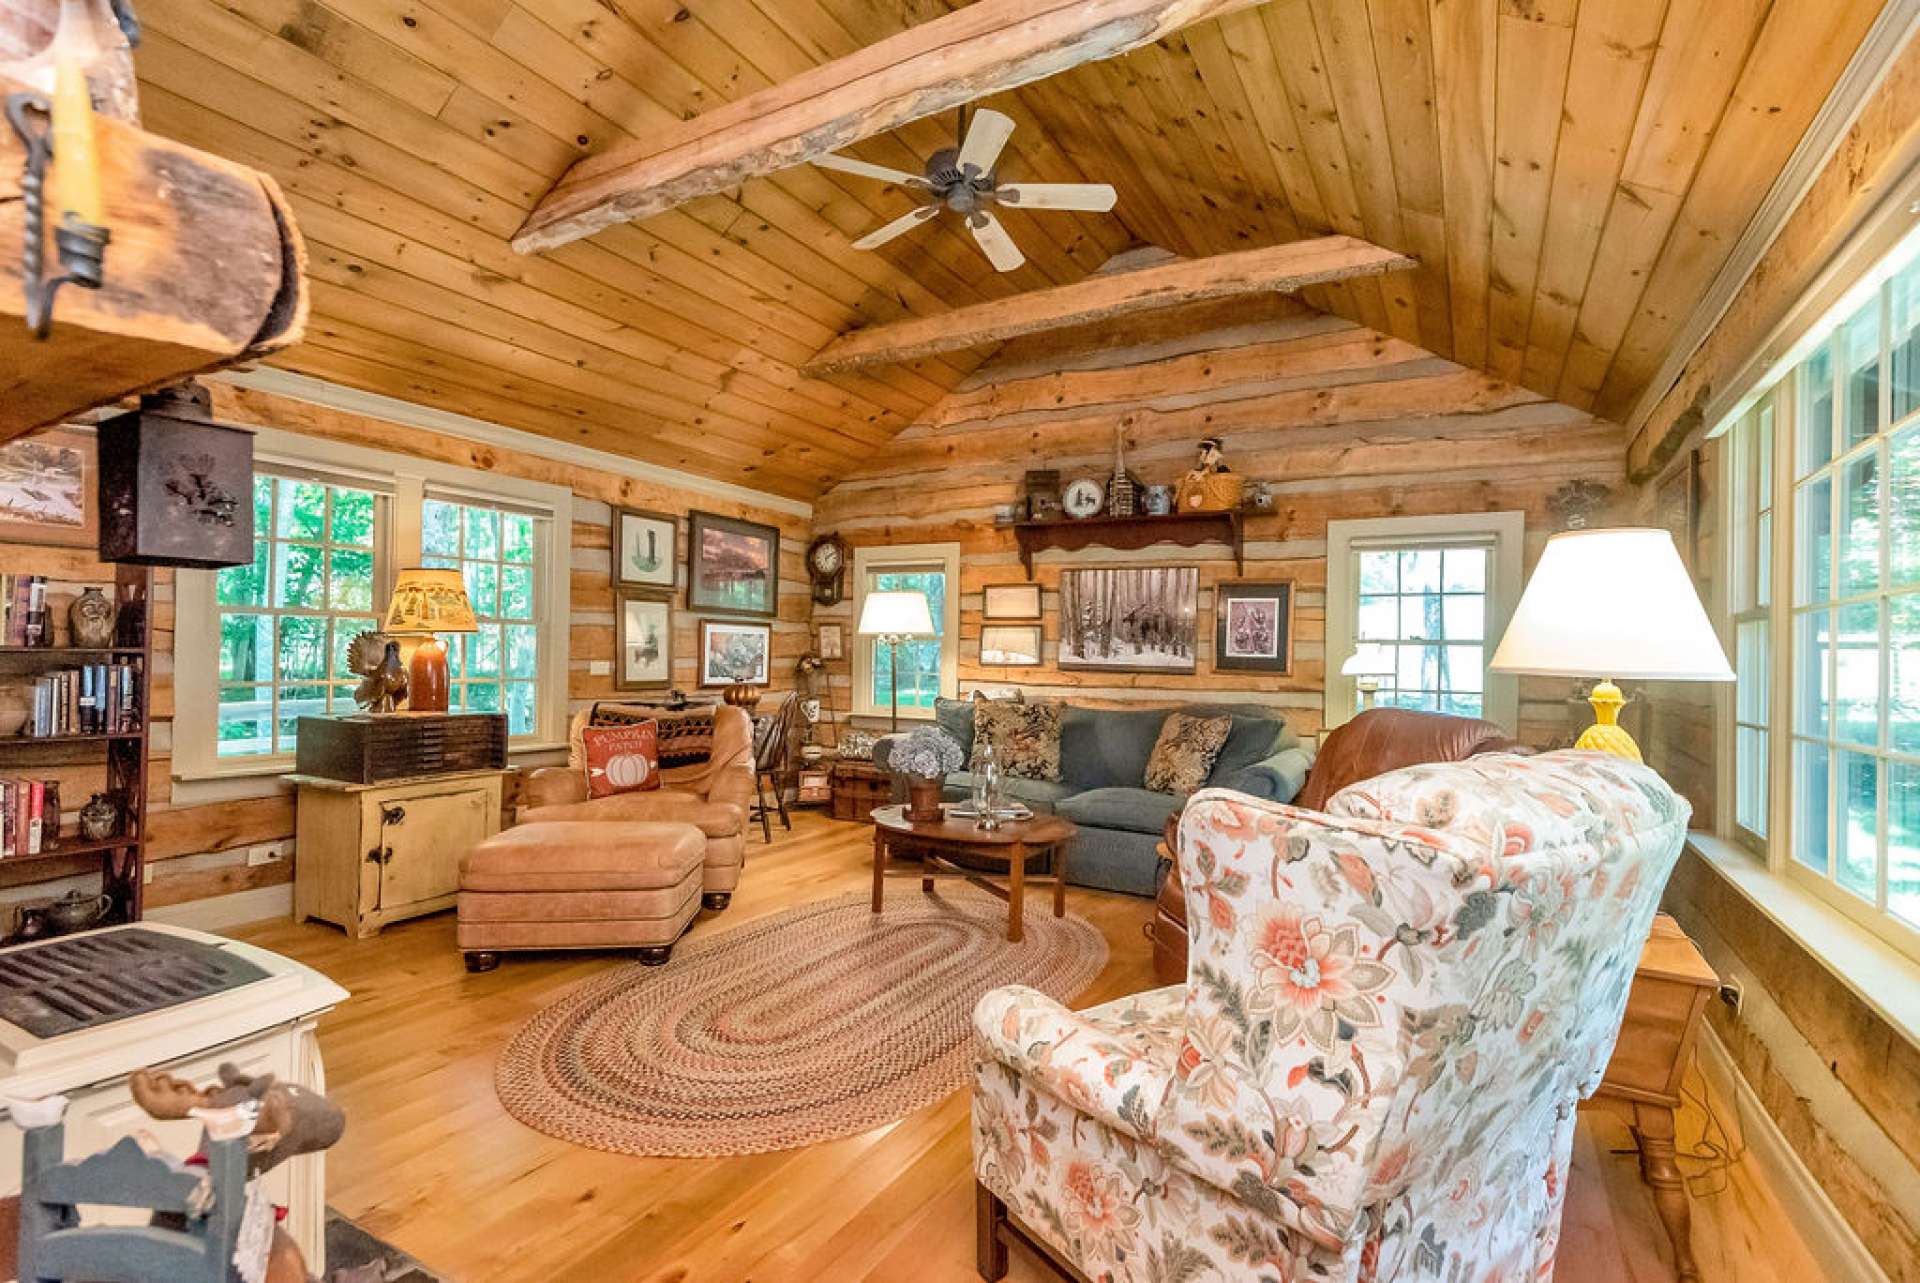 The warm and inviting family room features live edge beams, adding another level of mountain charm.